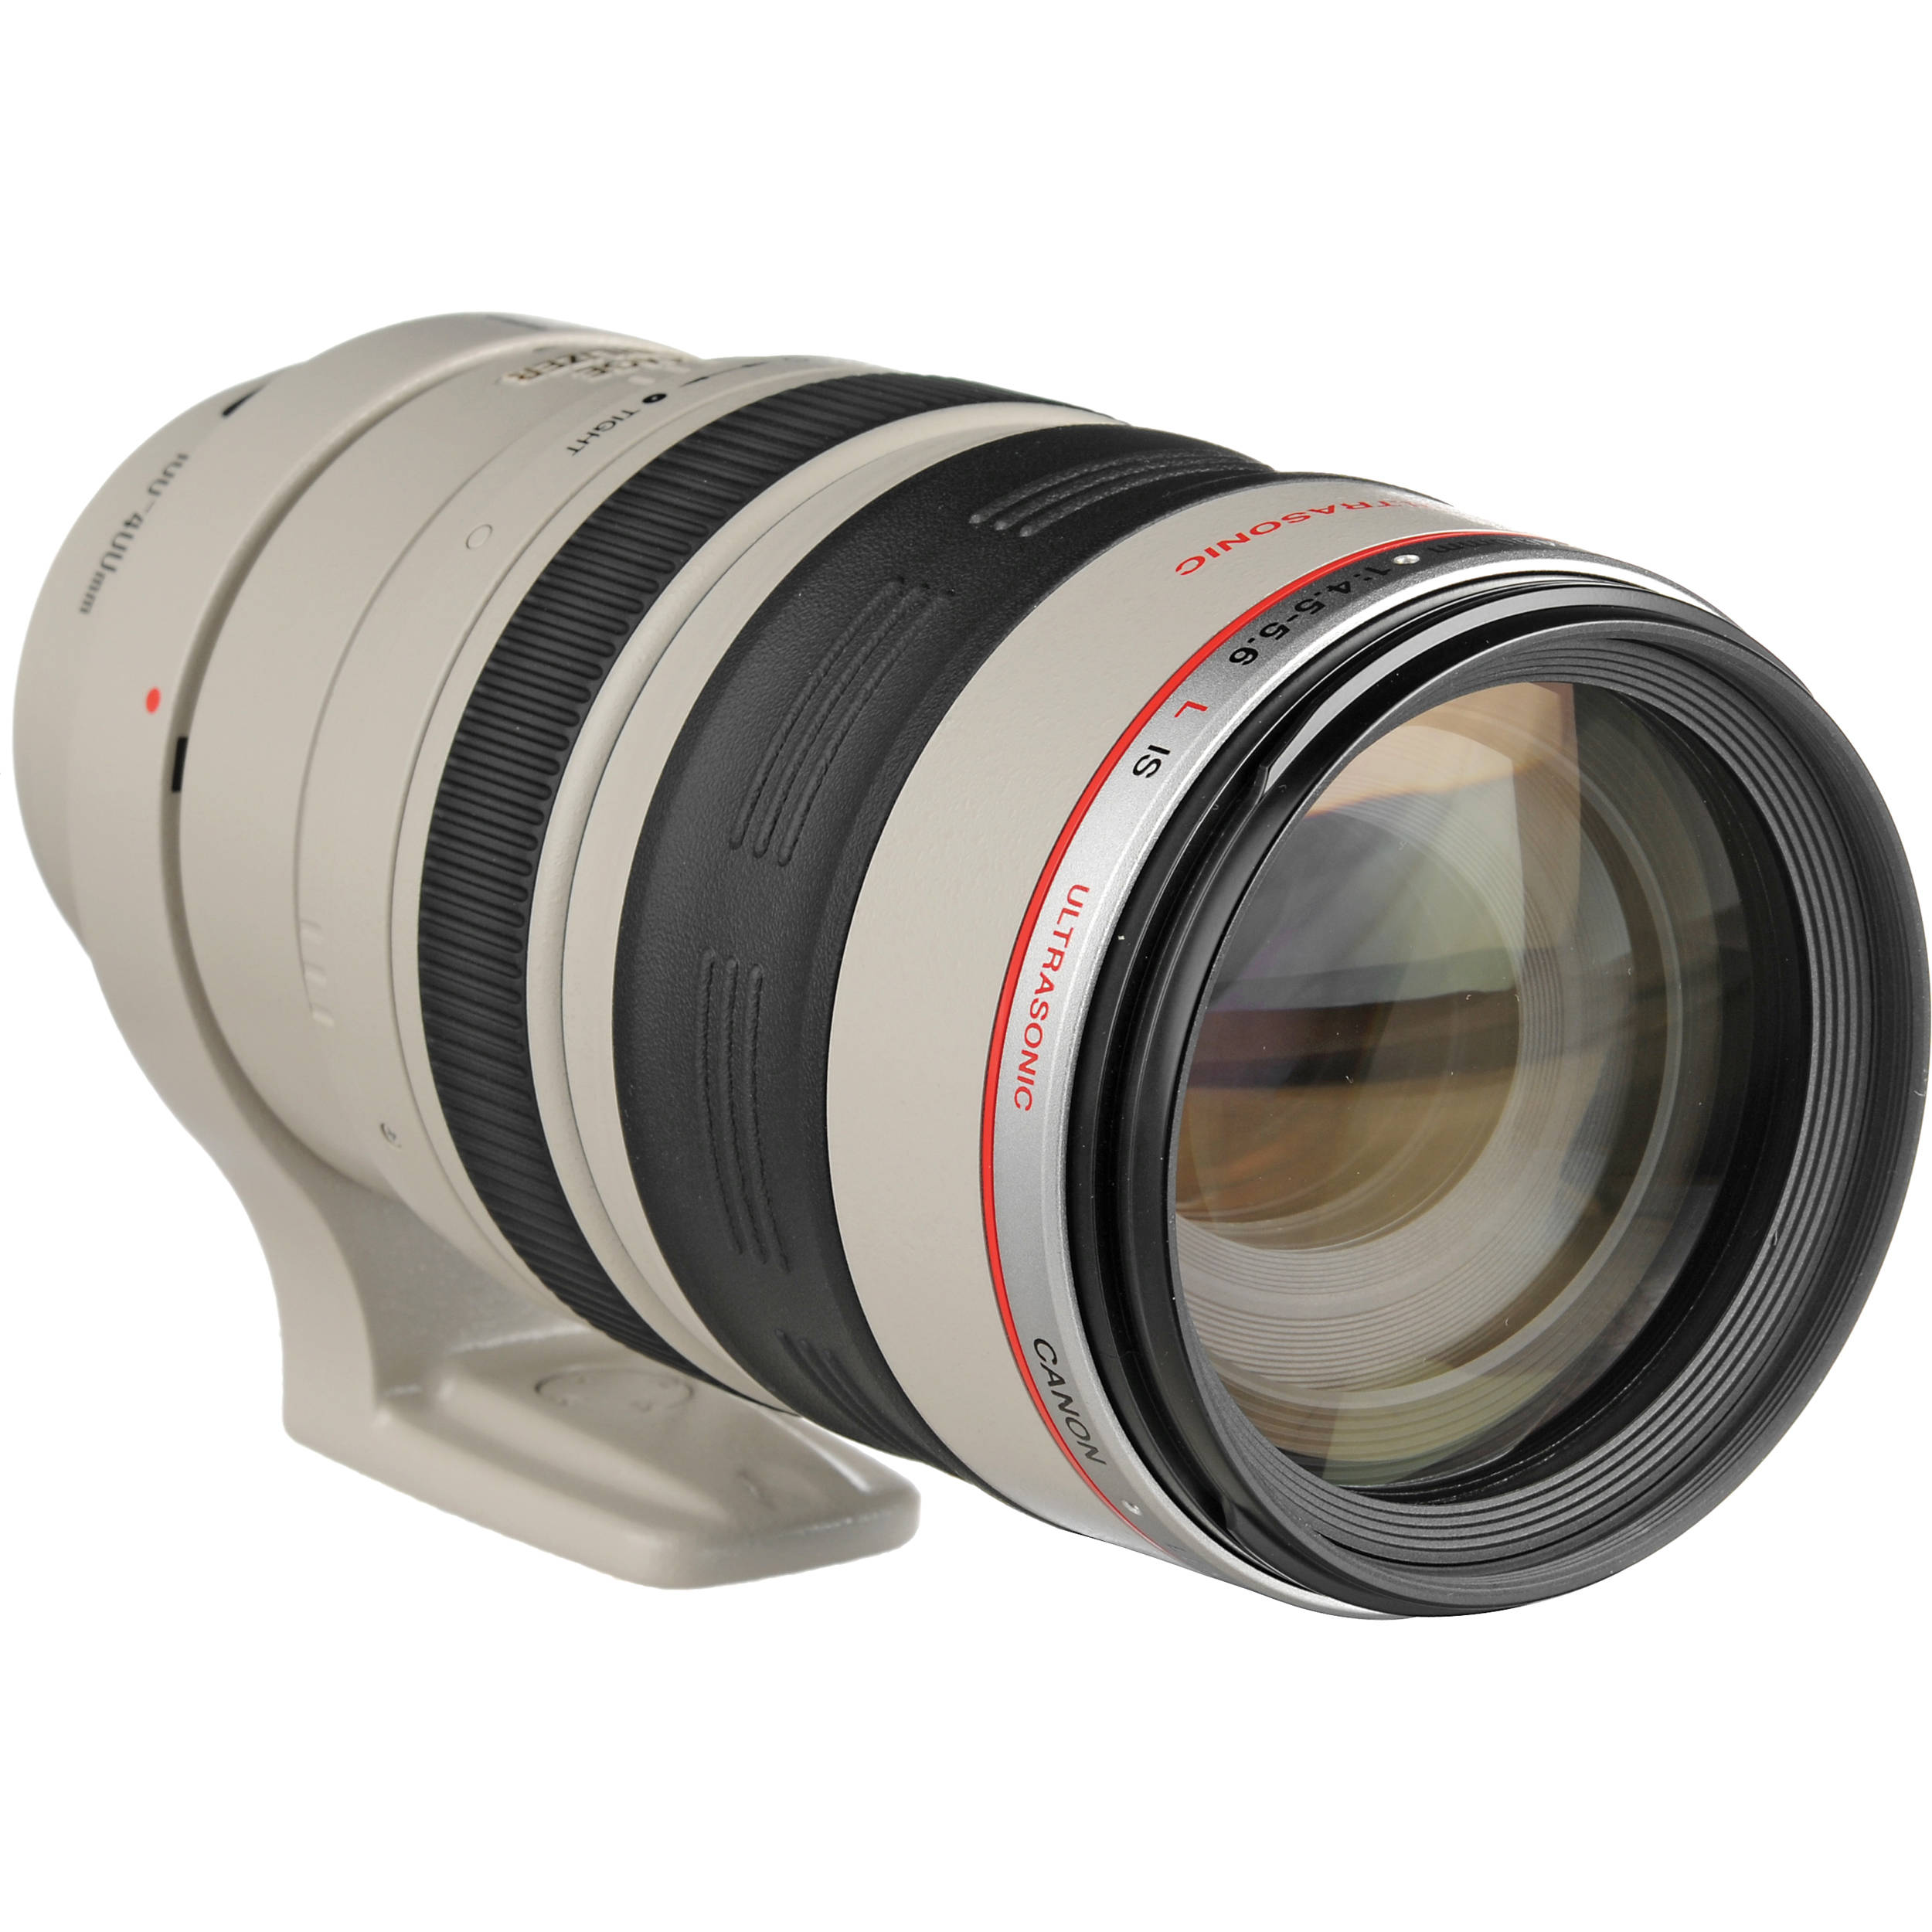 Canon EF 100-400mm f/4.5-5.6L IS II Specs, Price will be $2,399